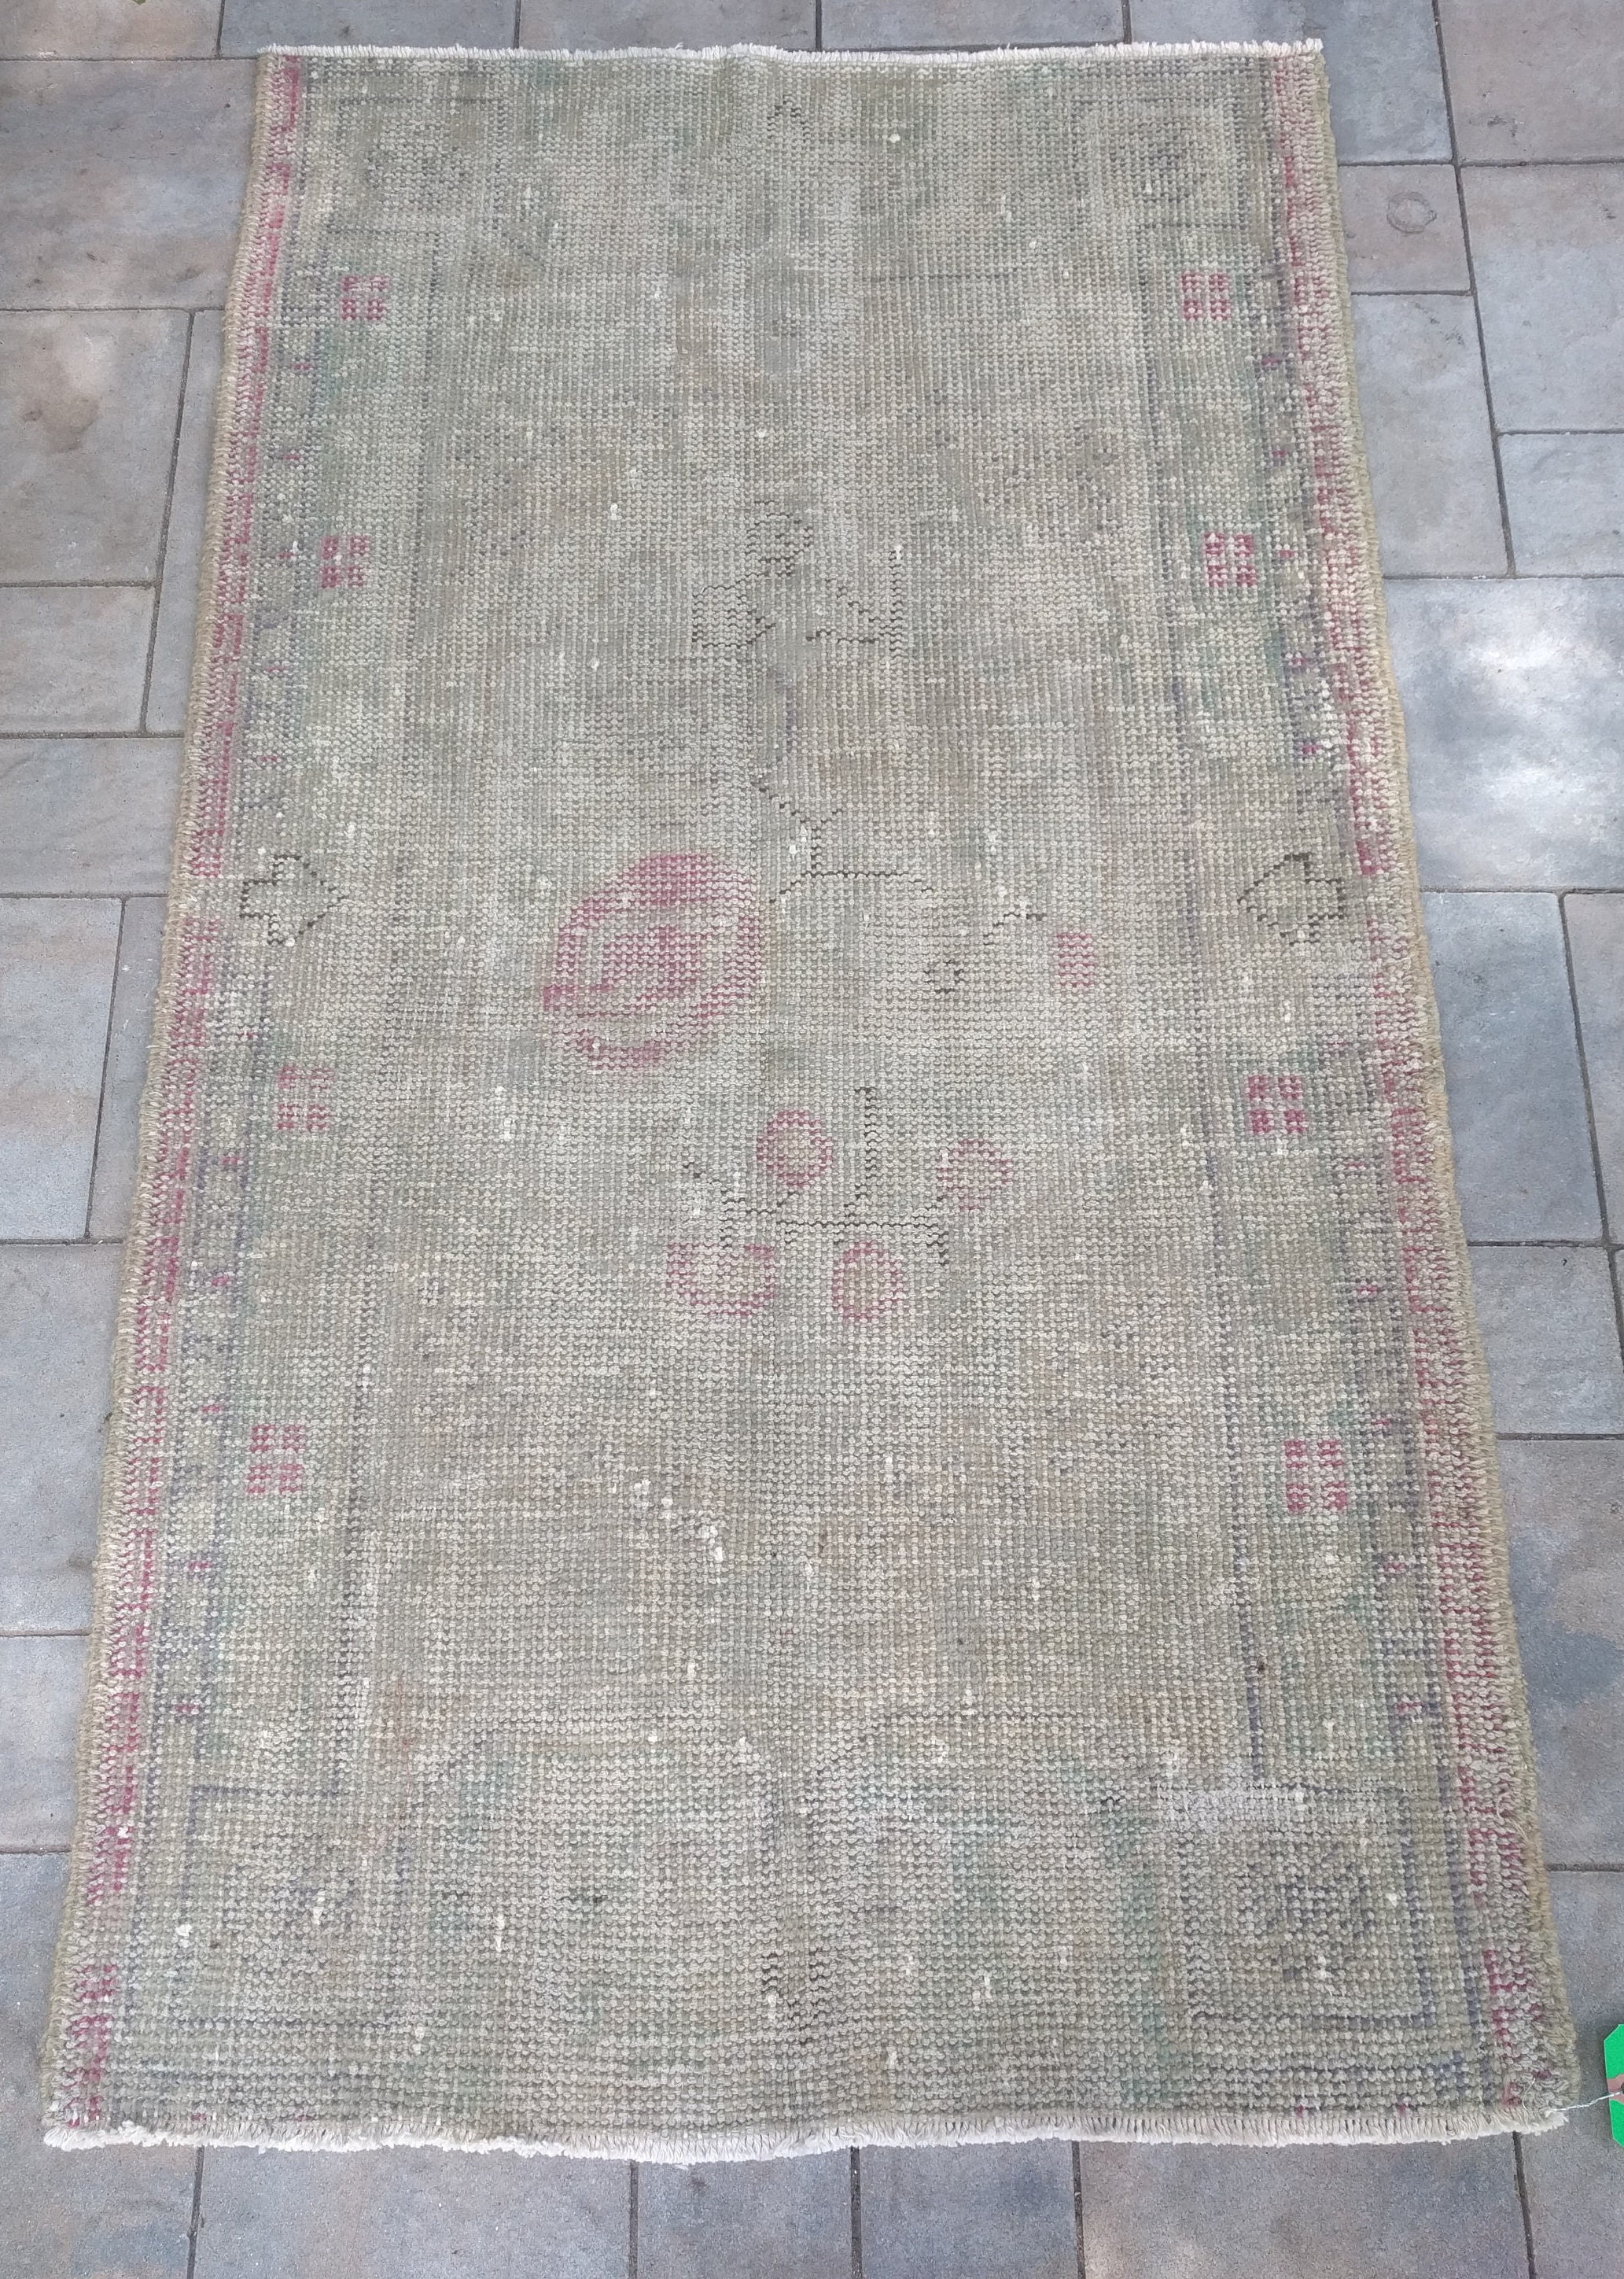 US SELLER - 2'3 X 4'4 Imported vintage Turkish rug retro distressed one of  a kind rug - free US shipping 3x4 4x3 antique wool ooak Worn out